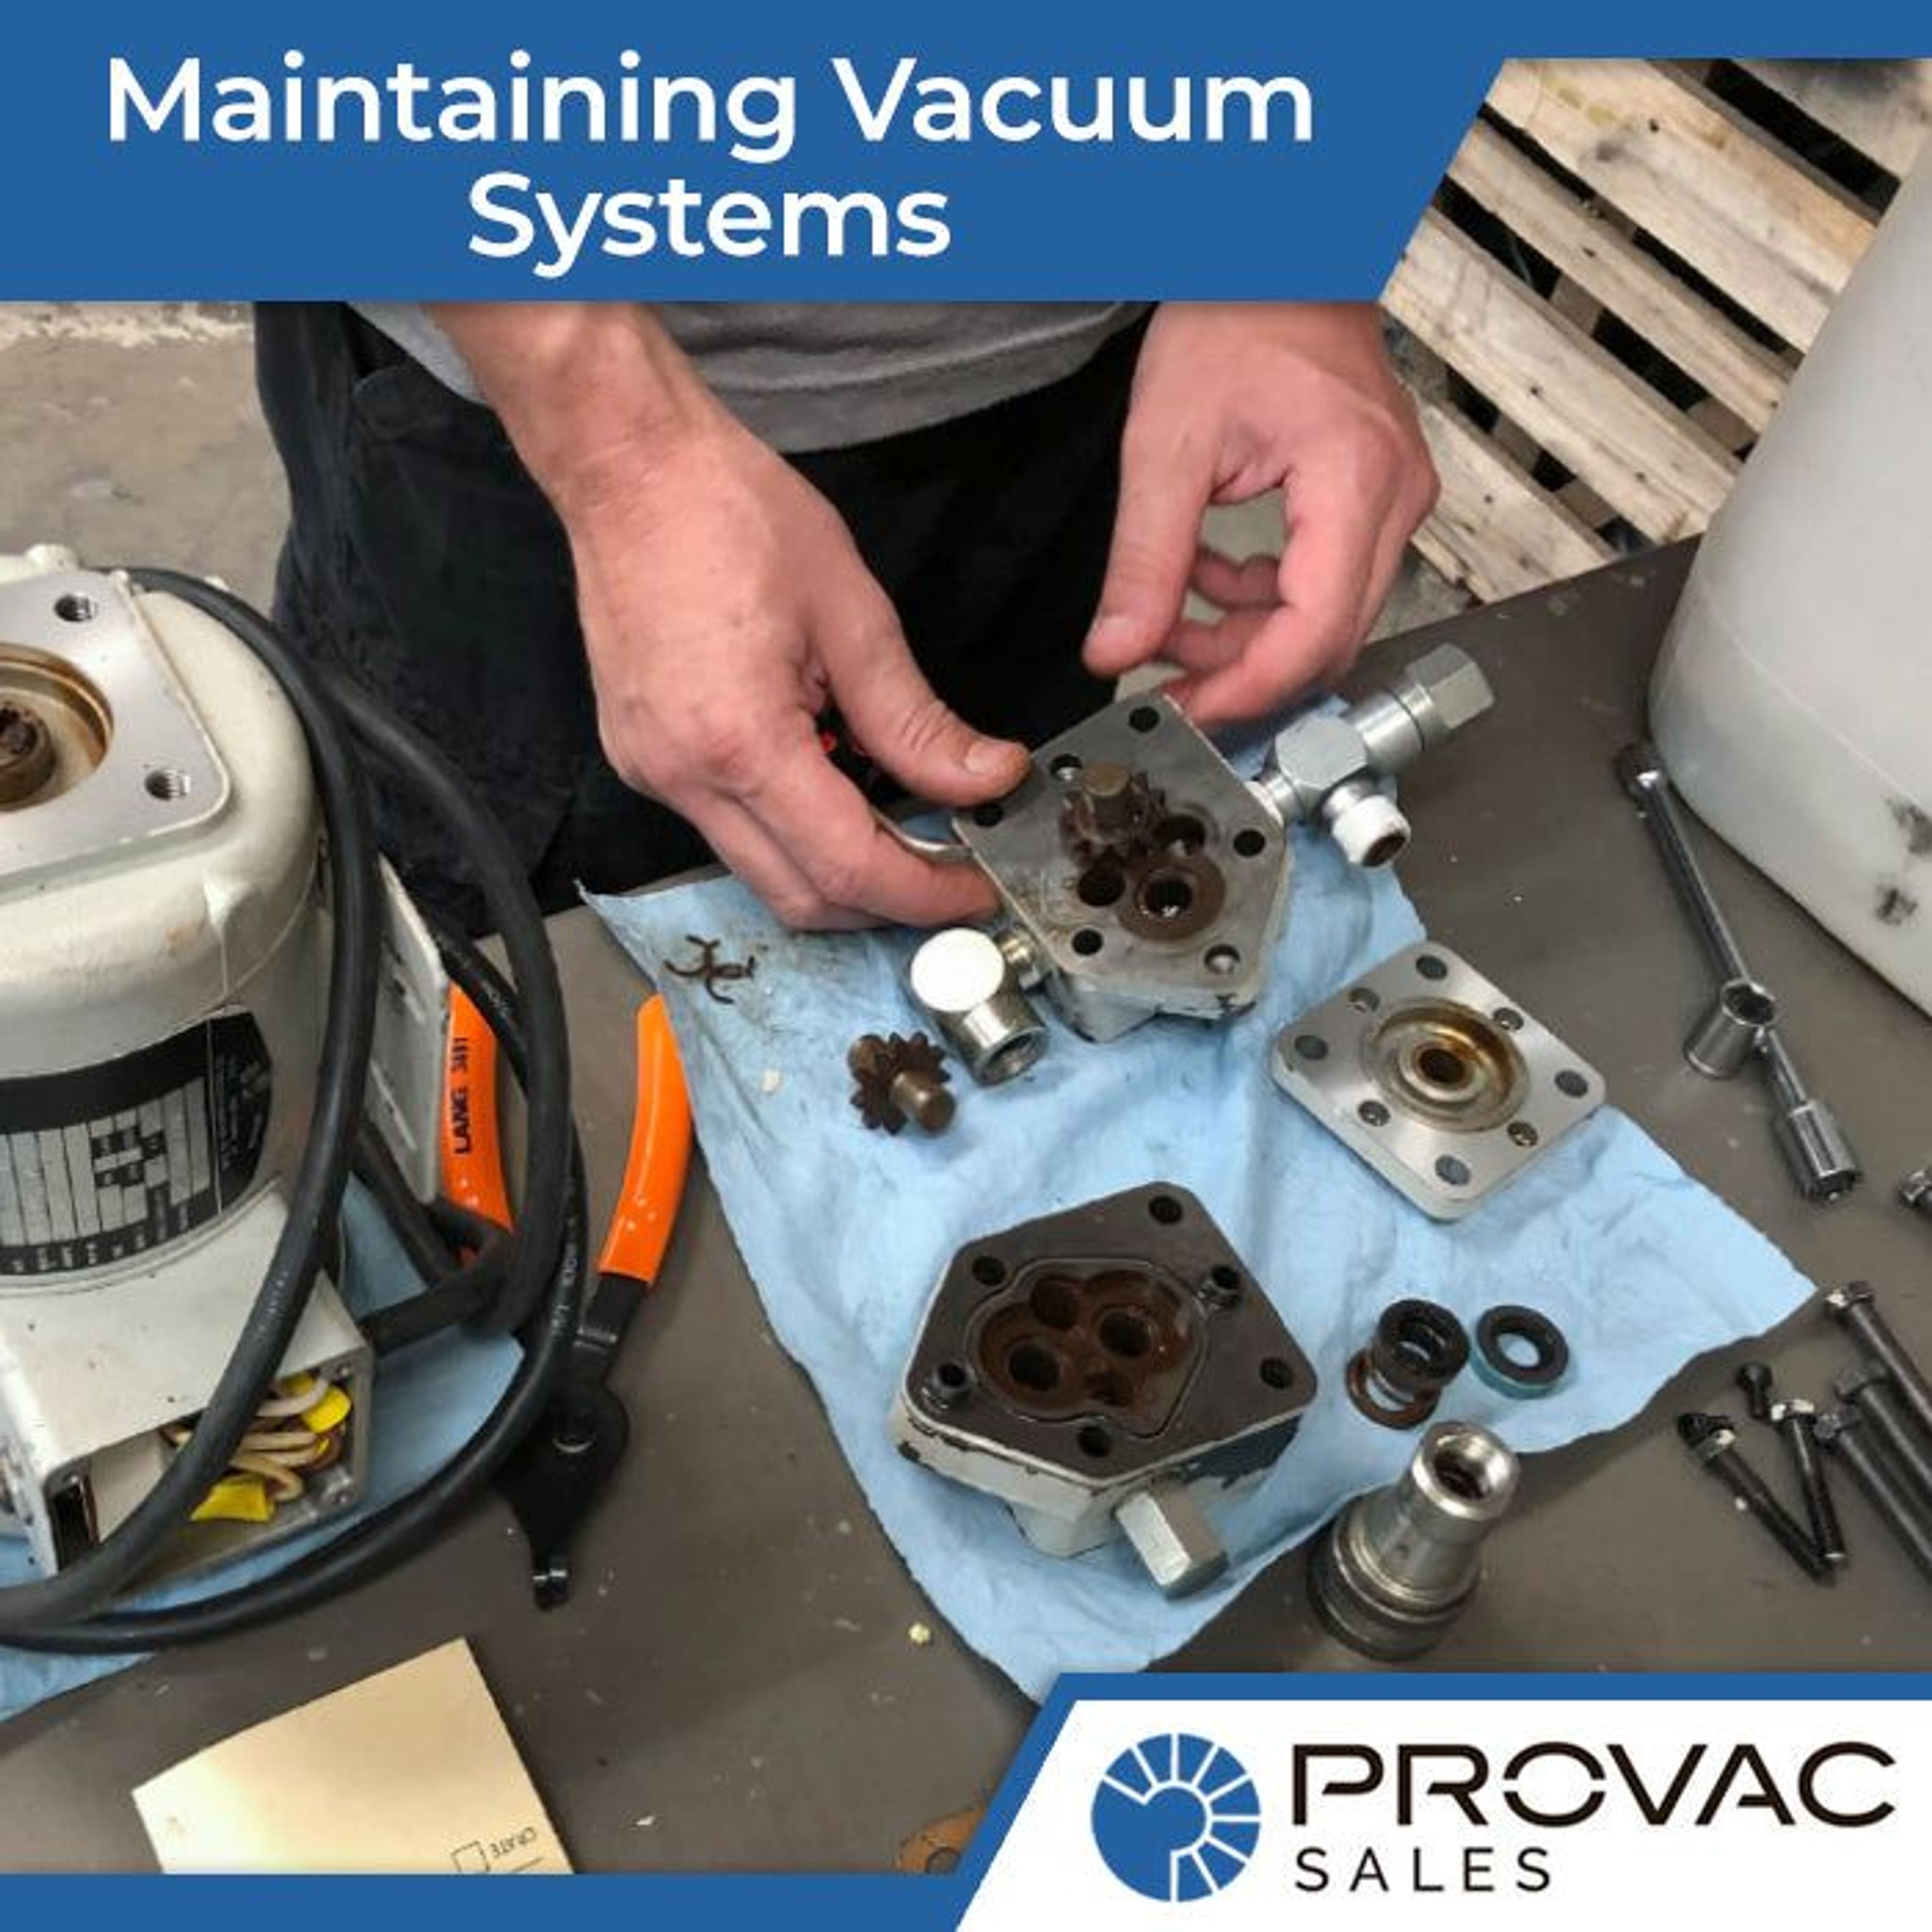 Maintaining Vacuum Systems - What You Need To Know Background